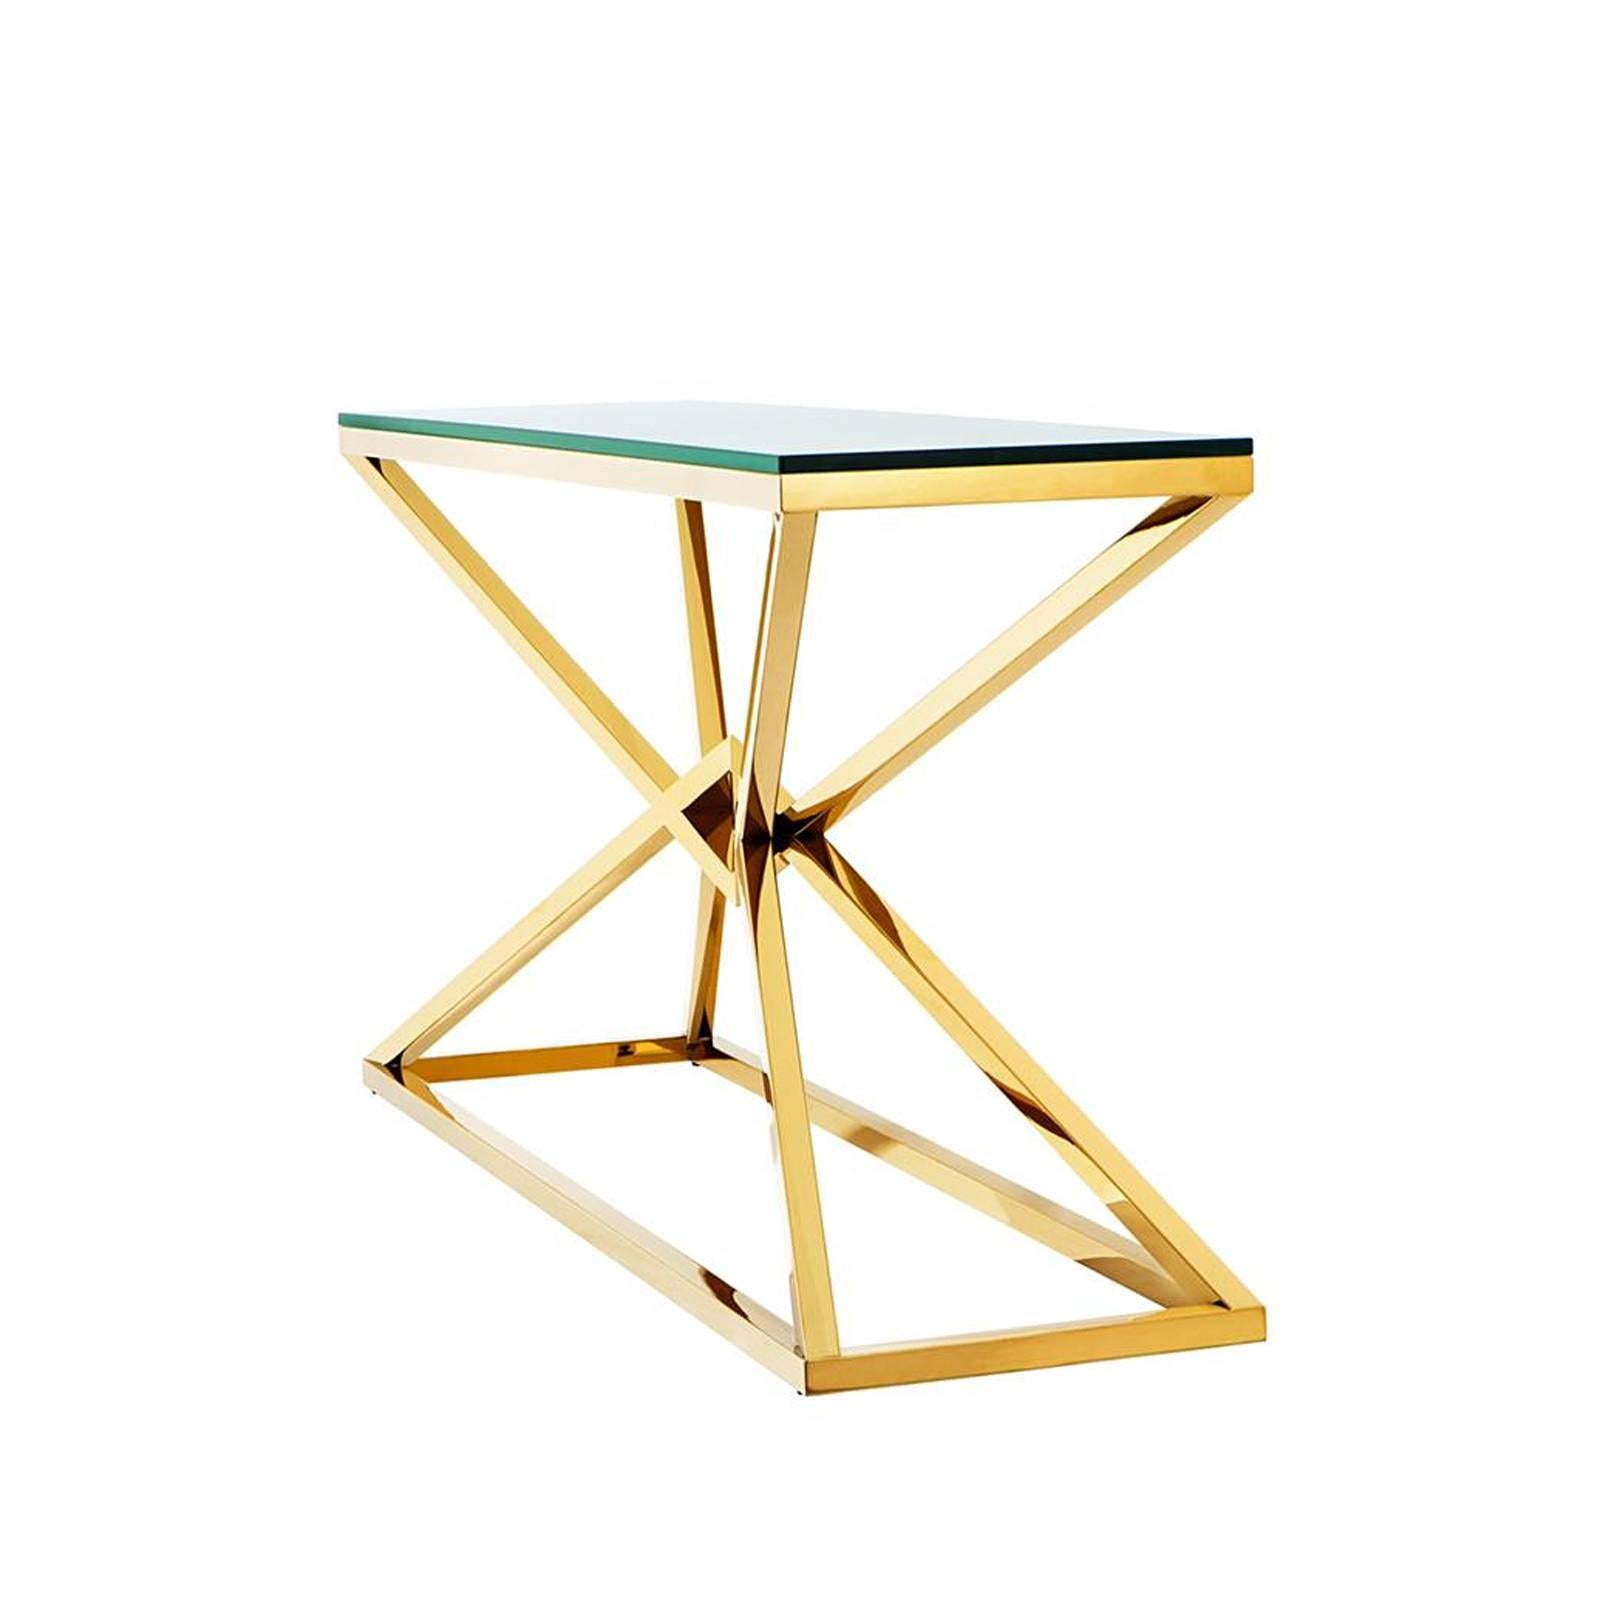 Console table Equis with clear glass top and gold finish
structure. Available in polished bronze finish or
stainless steel.
